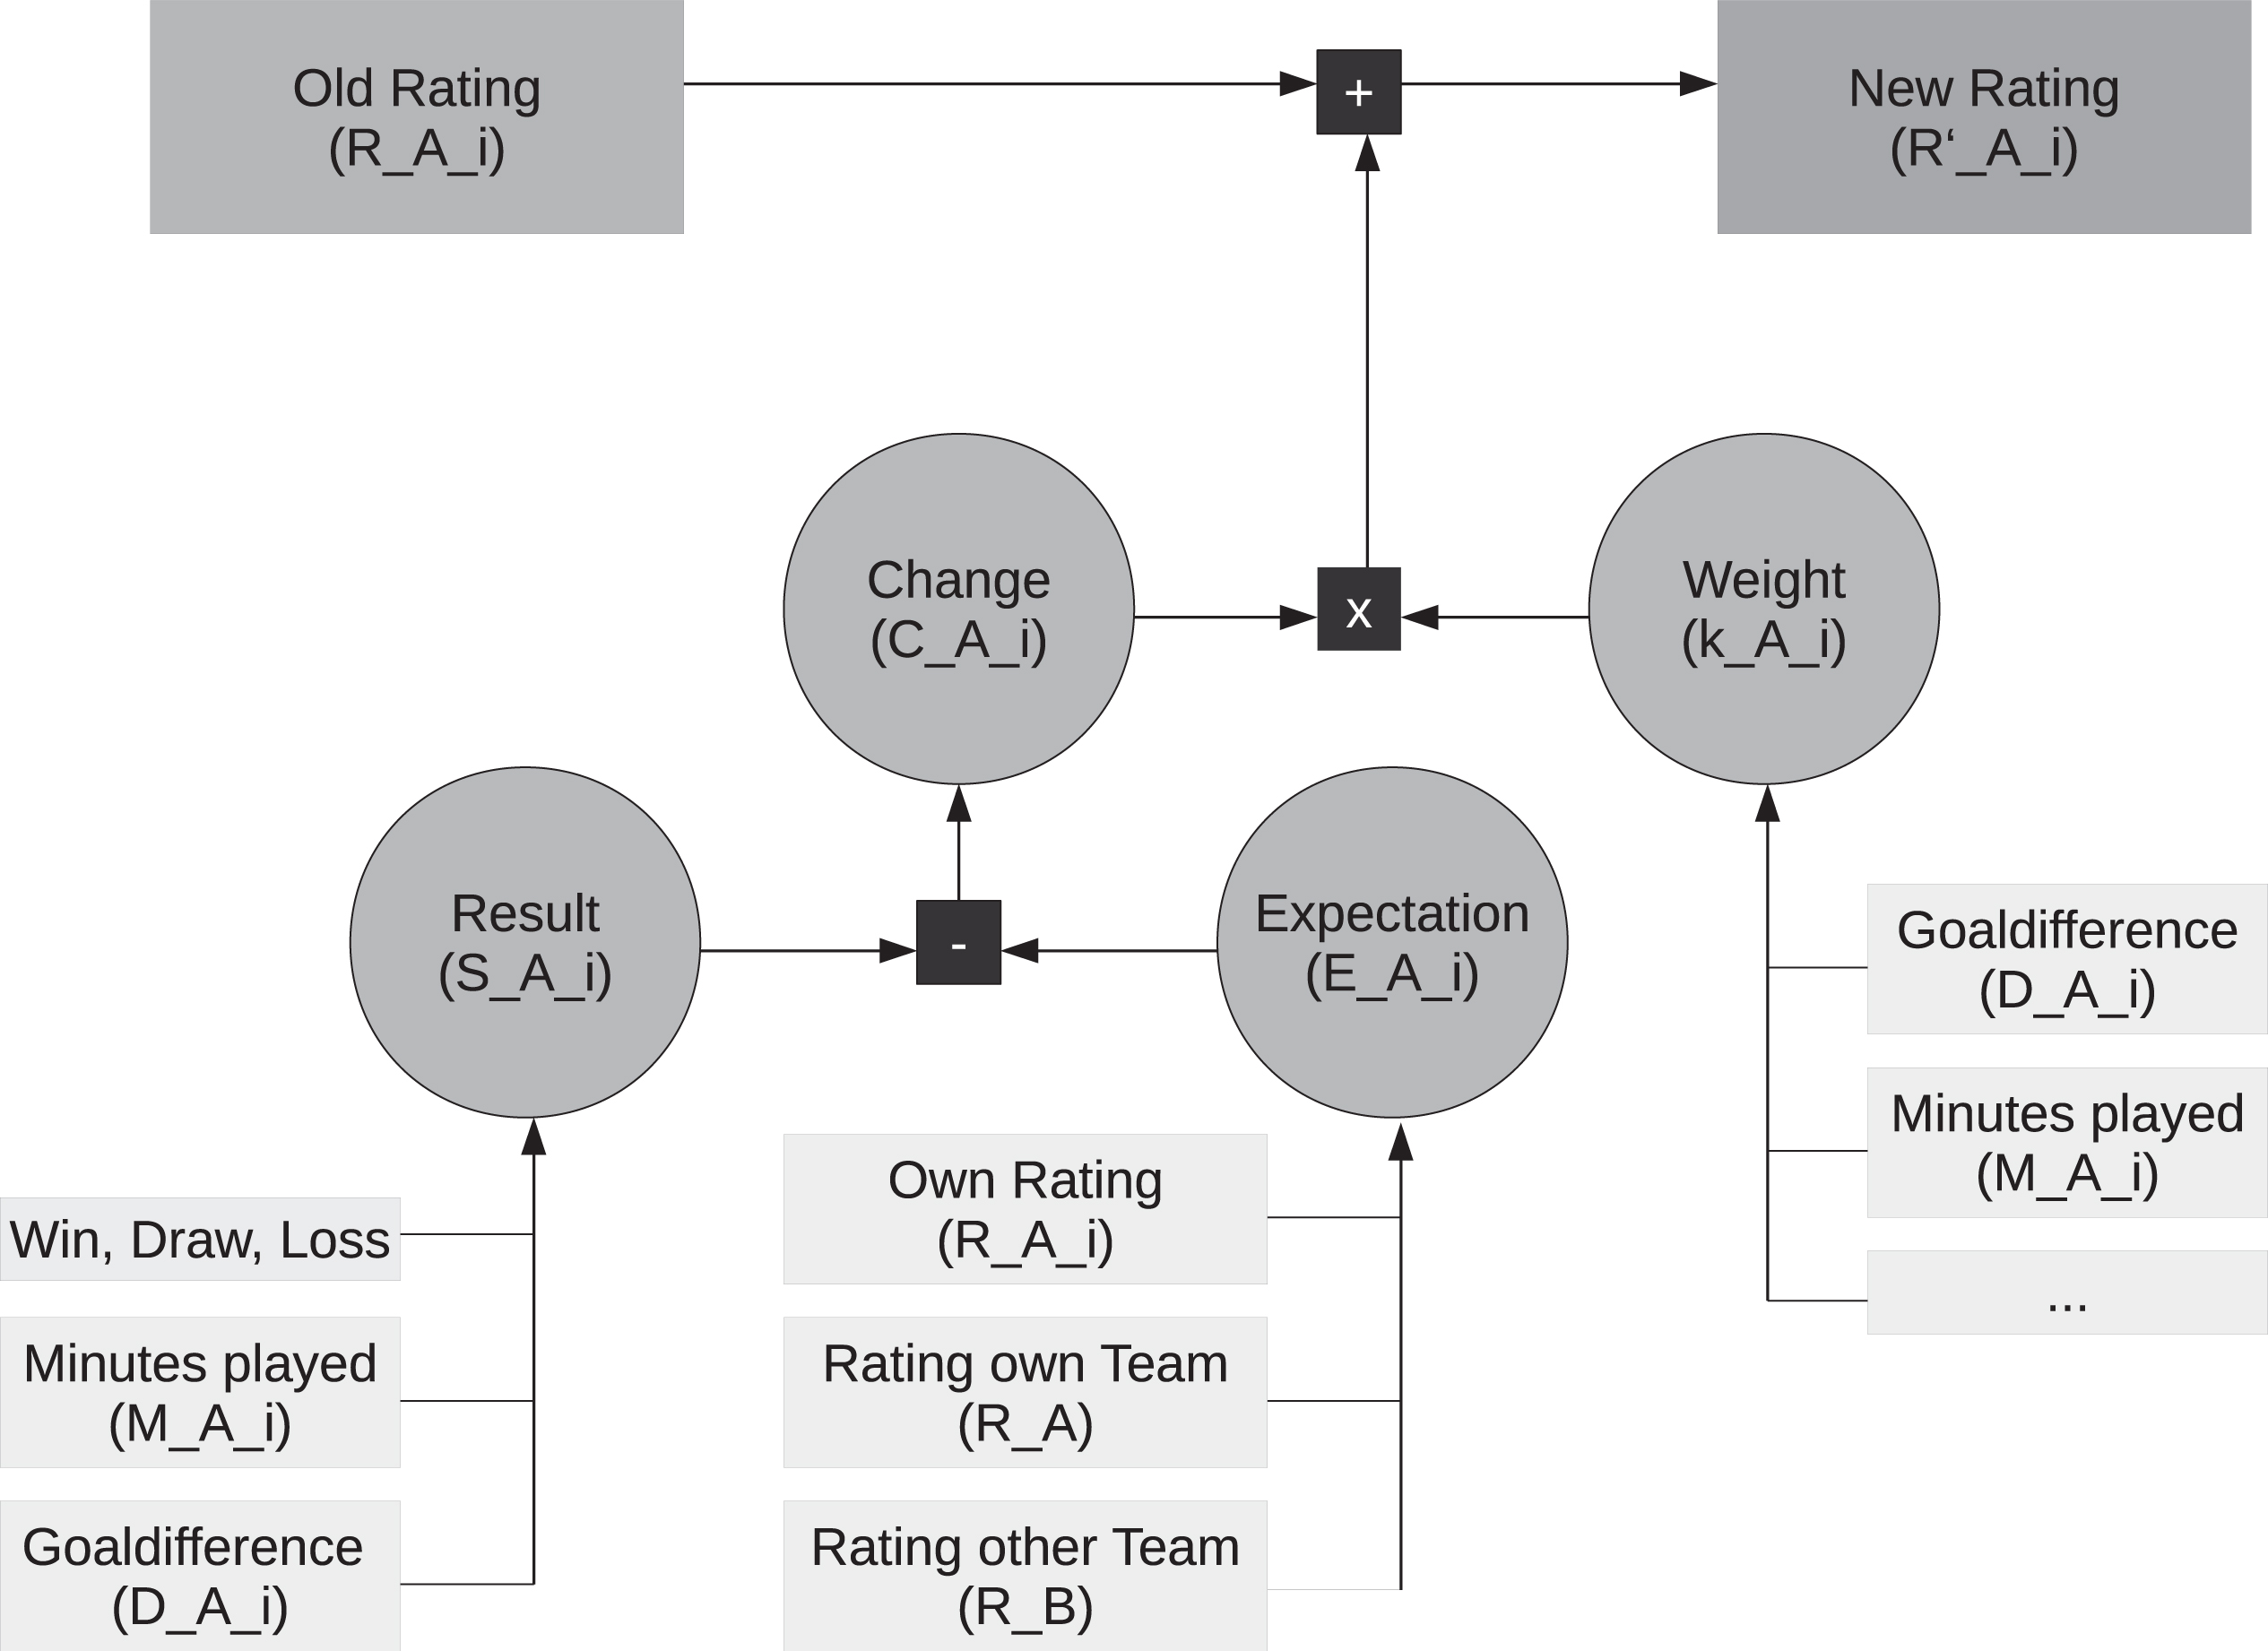 Basic idea of the algorithm: The illustration shows how the old rating RAi of a player Ai from team A is updated after each game played. The expectation placed on the player before the game results from his rating and the rating of his own and the opposing team. If the actual result is better than expected, this leads to a positive change. If the player does not meet expectations, the change is negative. After multiplying by a weight, the change and the old rating result in the new rating. If expectations are exceeded, the player’s rating improves. The more unexpected the result, the greater the difference between the old and the new rating.